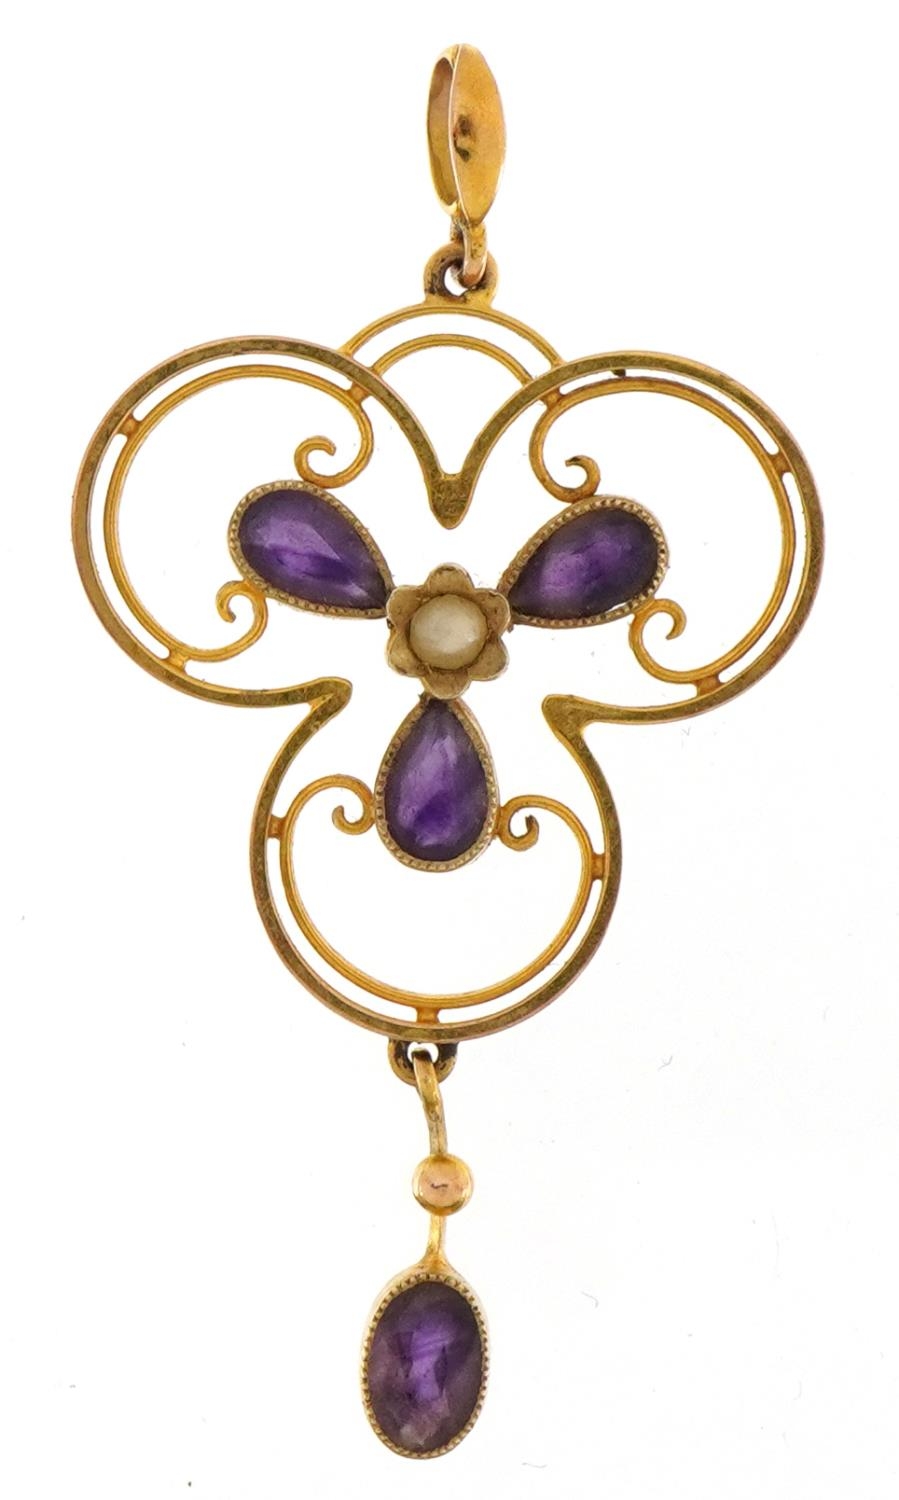 Edwardian 9ct gold amethyst and seed pearl drop pendant, 4.8cm high, 2.8g